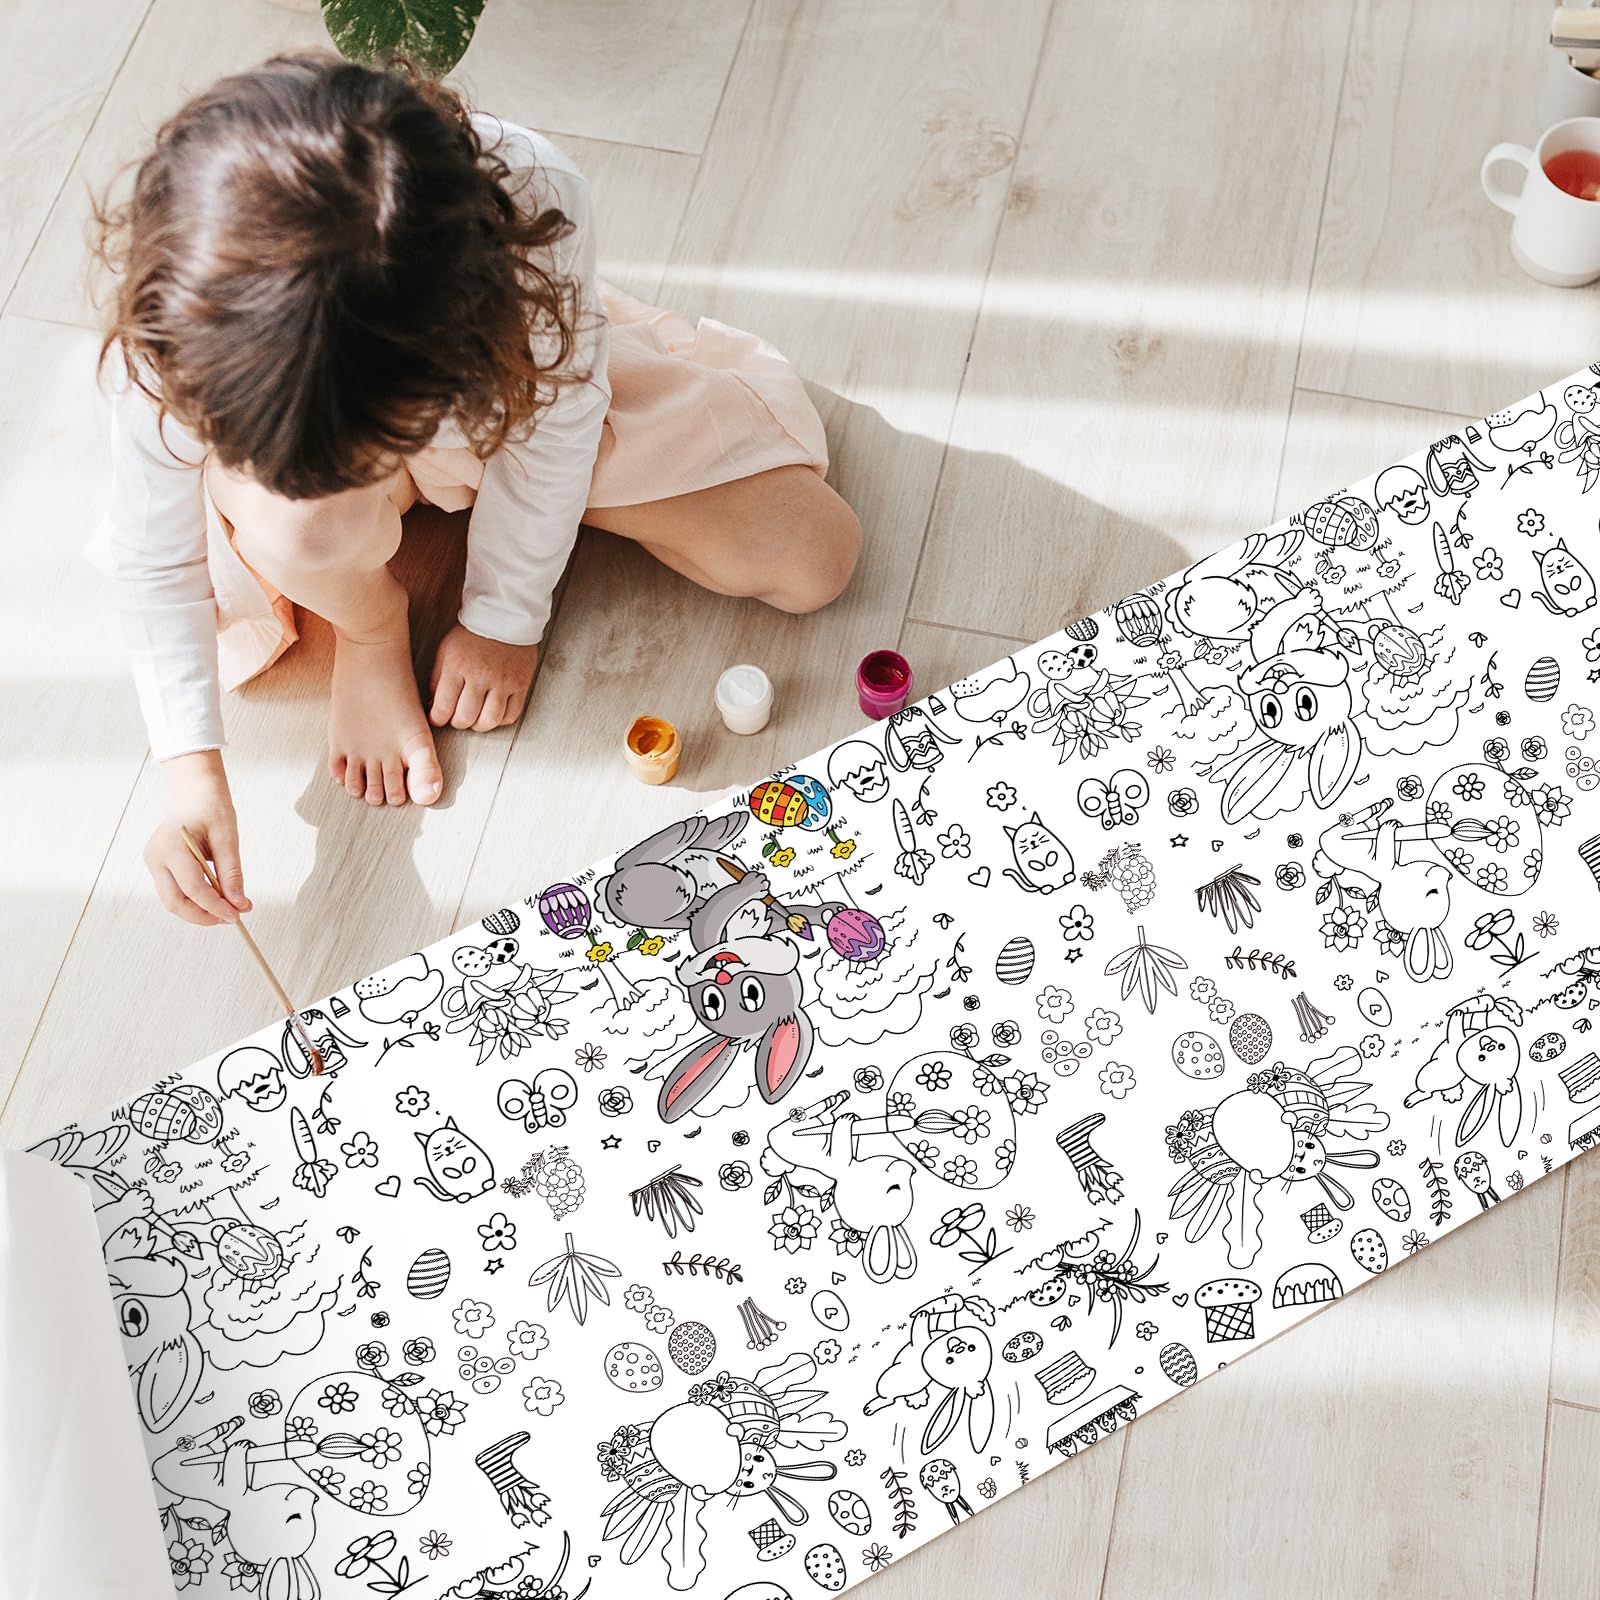 Tbsone Easter Giant Coloring Poster Tablecloth - Easter Crafts for Kids, 178 * 76 cm Inches Easter Decorations Gifts Games Activities Books for Kids